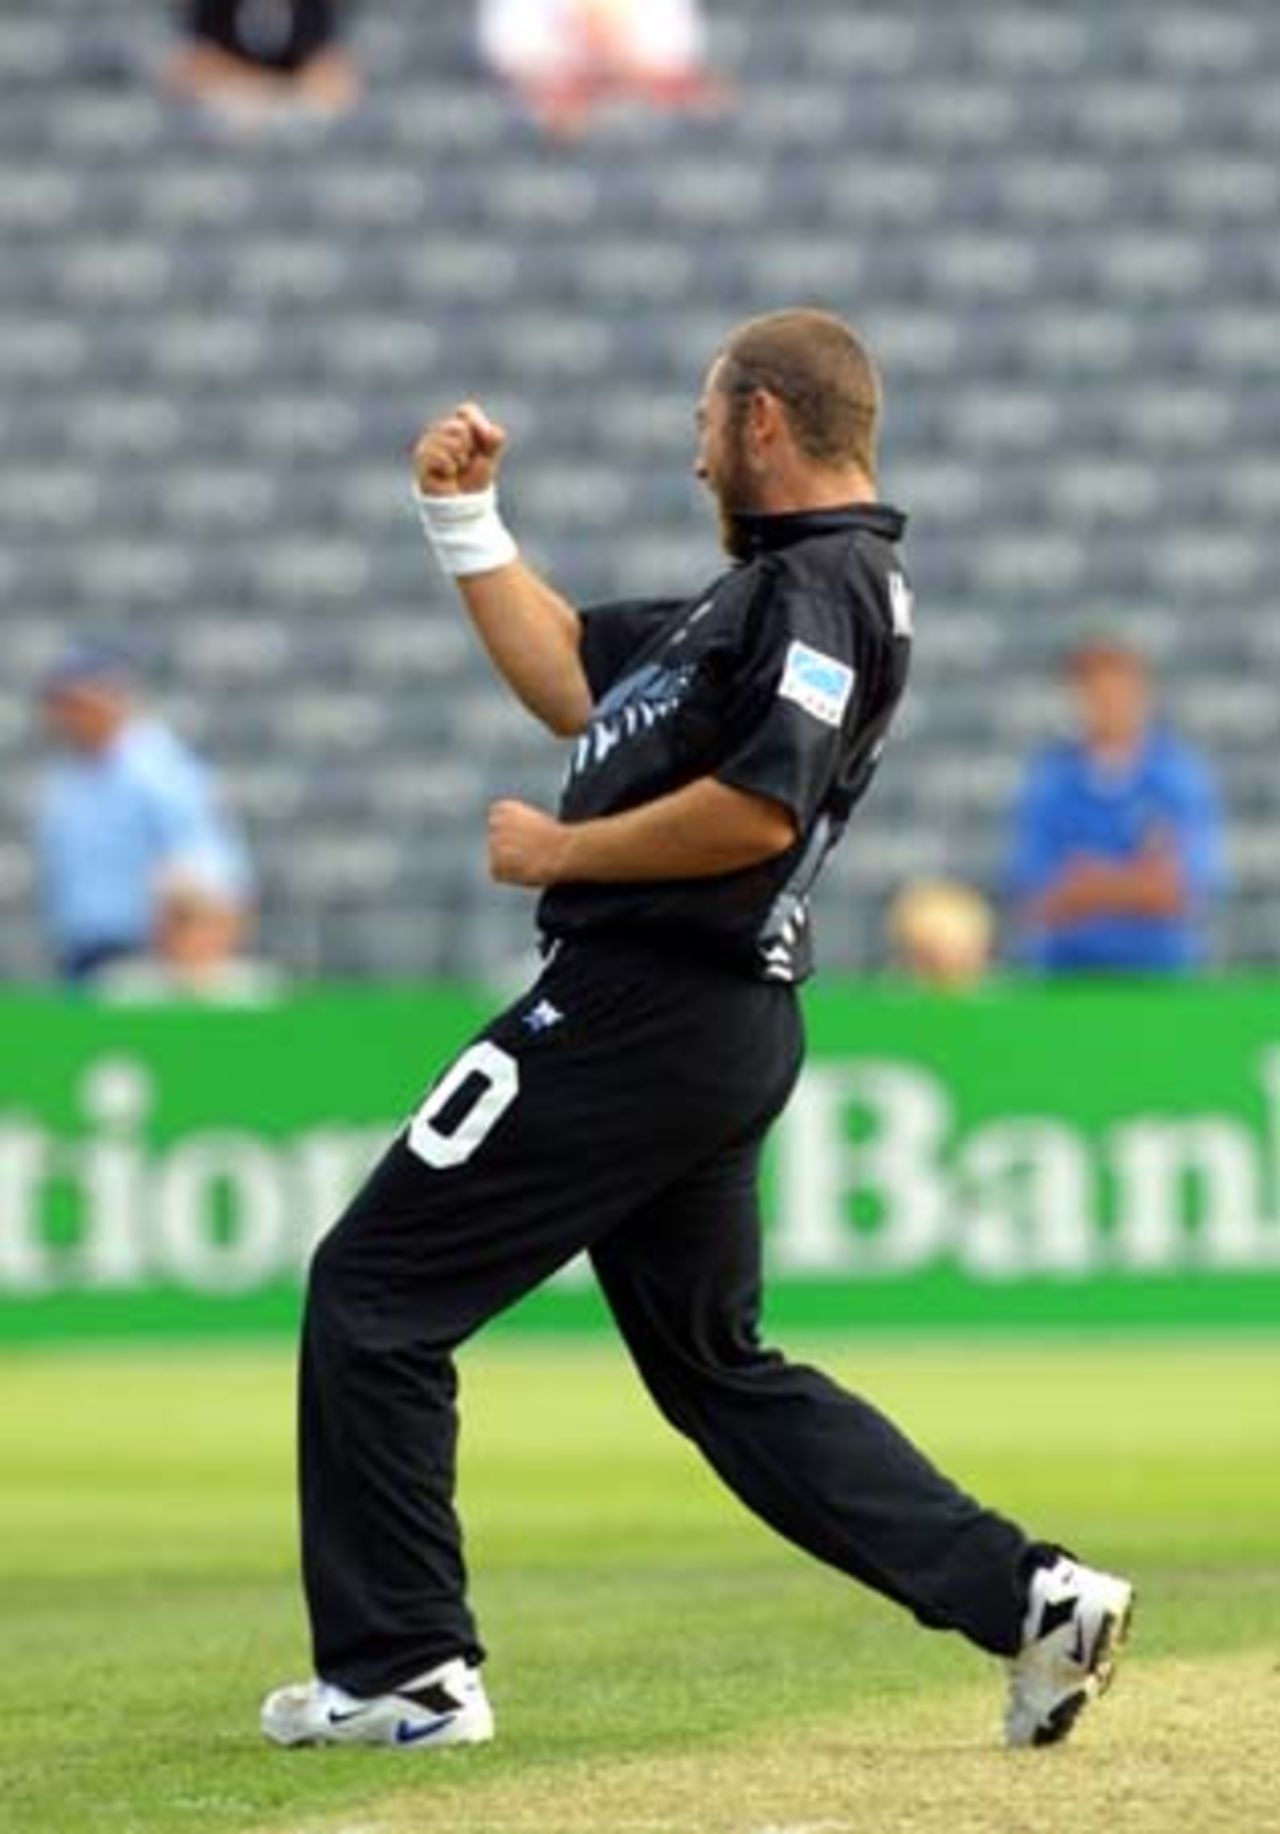 New Zealand medium fast bowler Craig McMillan pumps his fist in the air in celebration of bowling Sri Lankan lower order batsman Mutiah Muralitharan for four, to complete victory by 13 runs. 5th One-Day International: New Zealand v Sri Lanka at Jade Stadium, Christchurch, 11 February 2001.